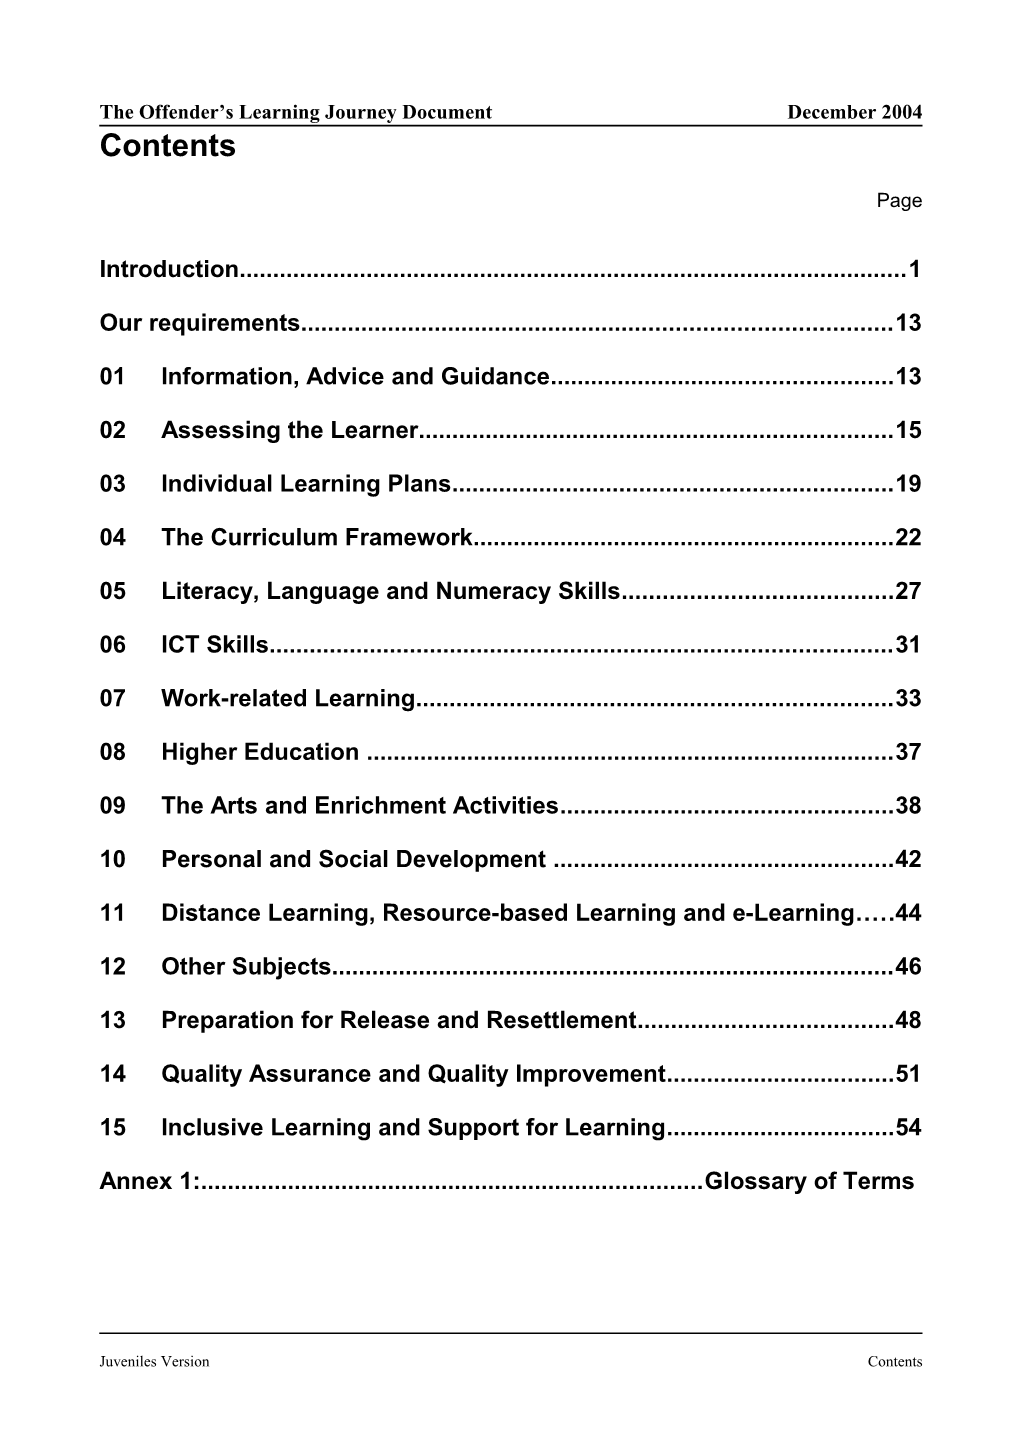 The Specification for Learning and Skils Relating to Juveniles in HMPS Prisons in England